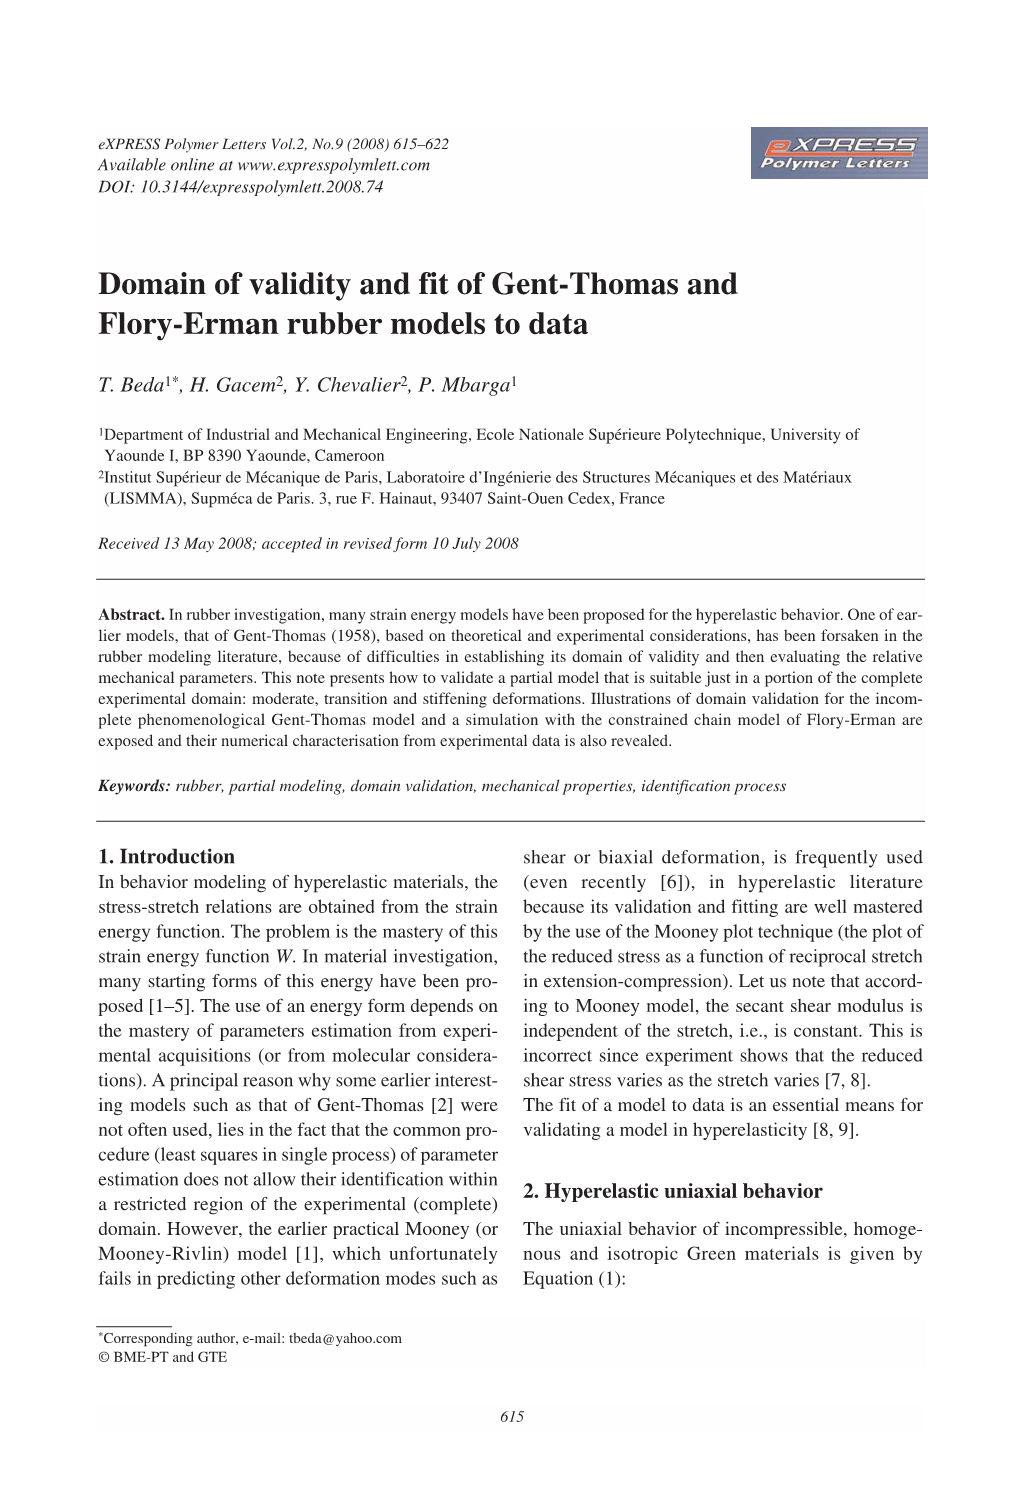 Domain of Validity and Fit of Gent-Thomas and Flory-Erman Rubber Models to Data